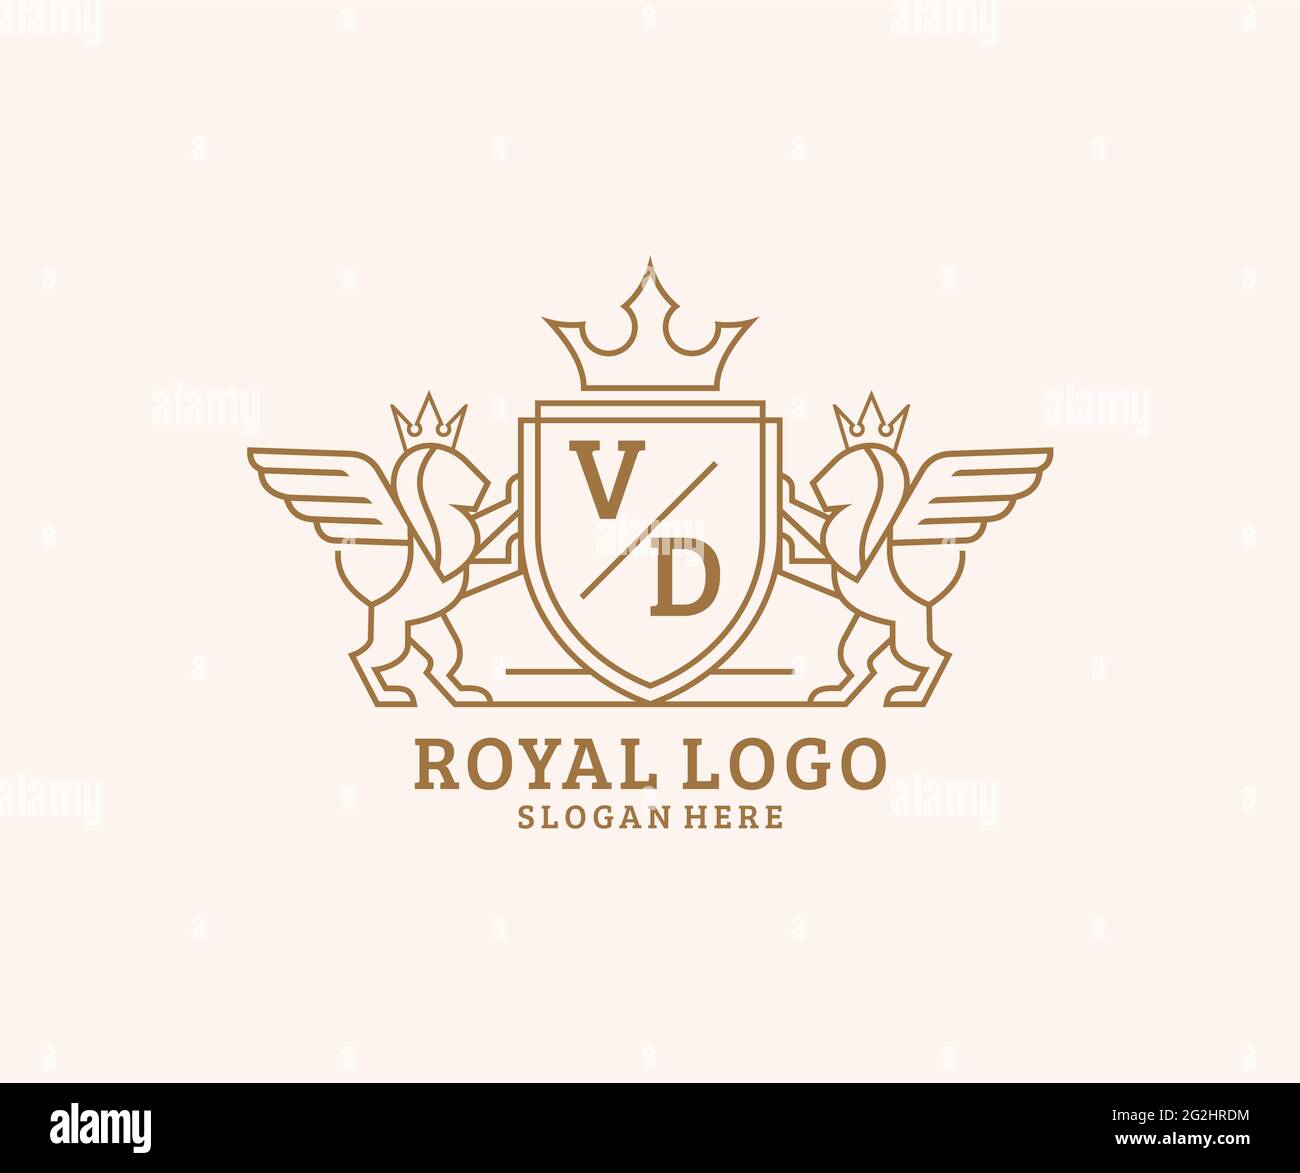 VD Letter Lion Royal Luxury Heraldic,Crest Logo template in vector art for Restaurant, Royalty, Boutique, Cafe, Hotel, Heraldic, Jewelry, Fashion and Stock Vector